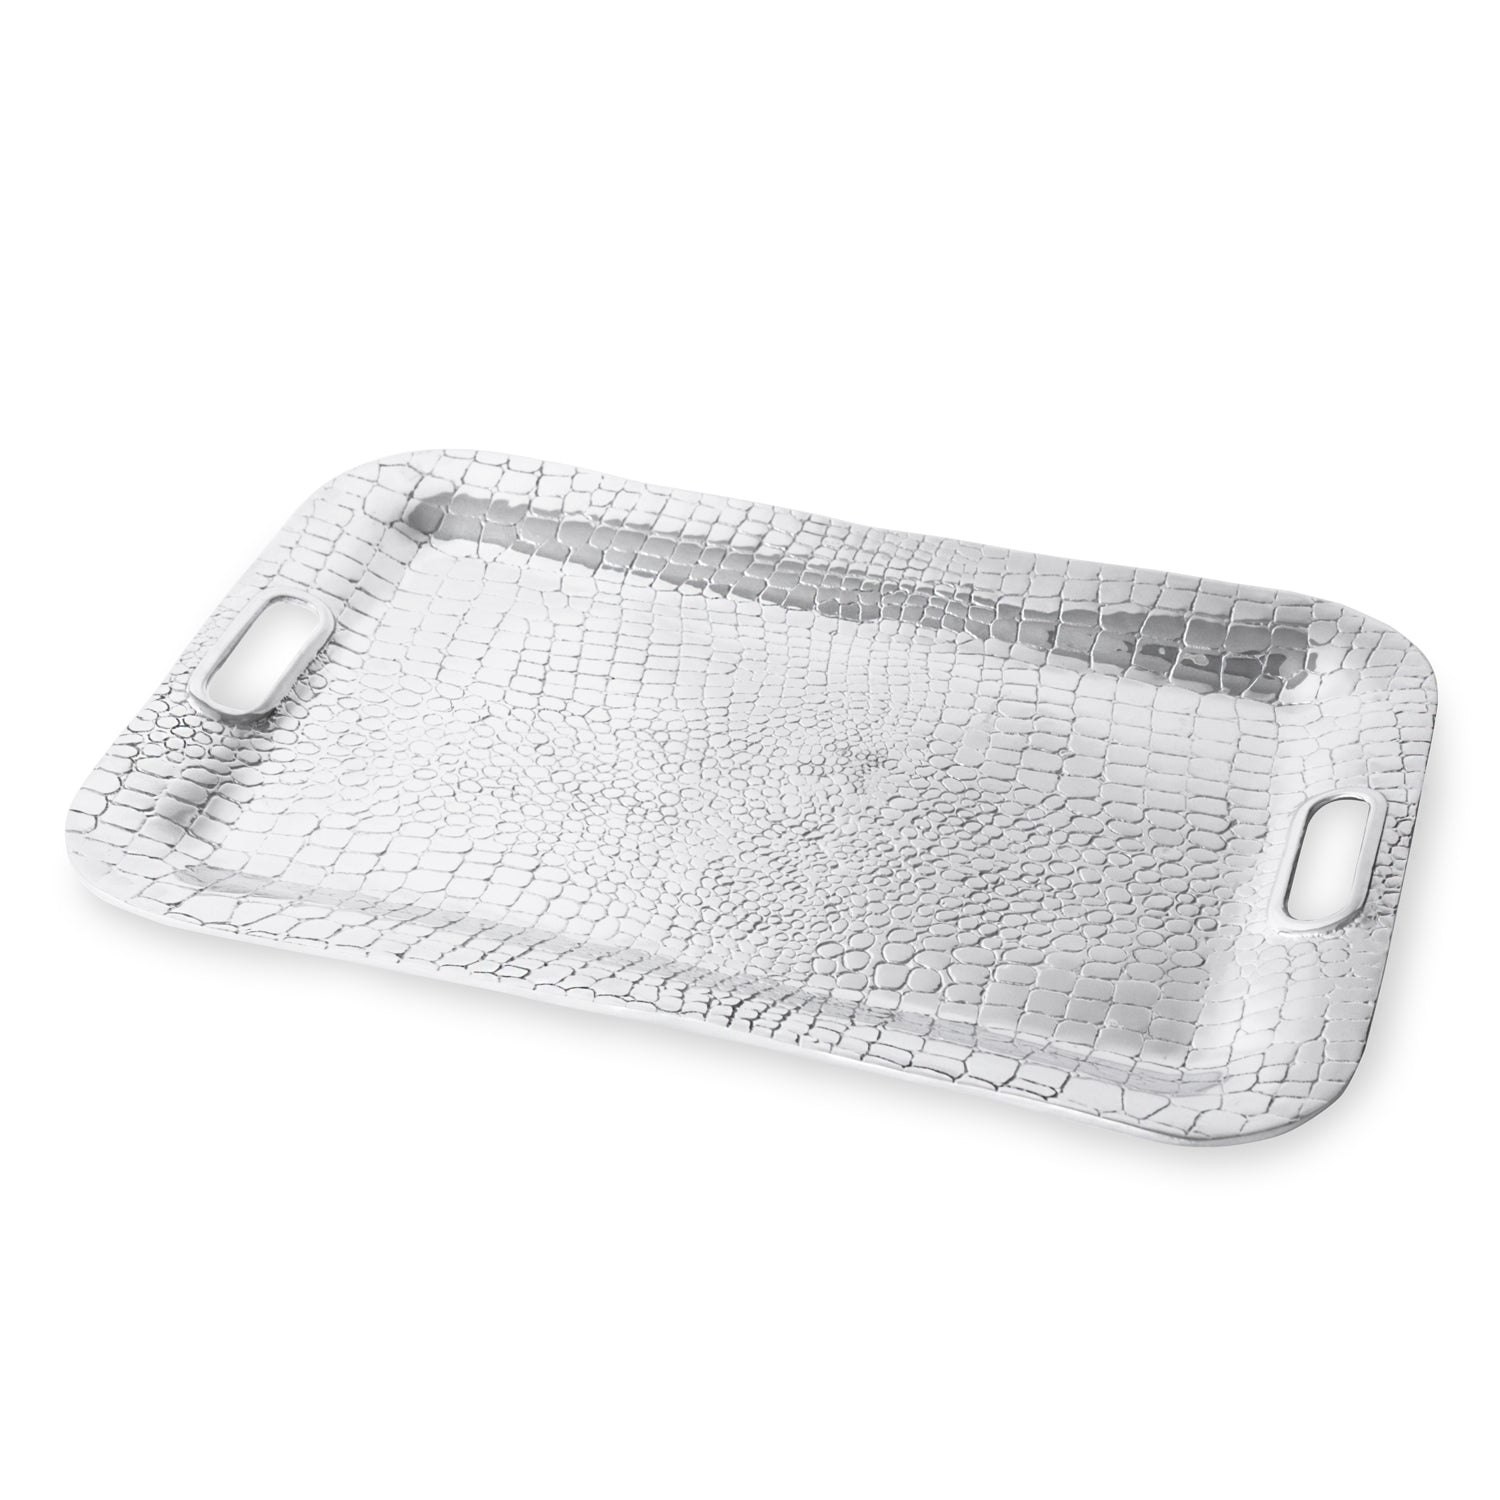 PIELES Croc Extra Large Rectangular Tray with Handles